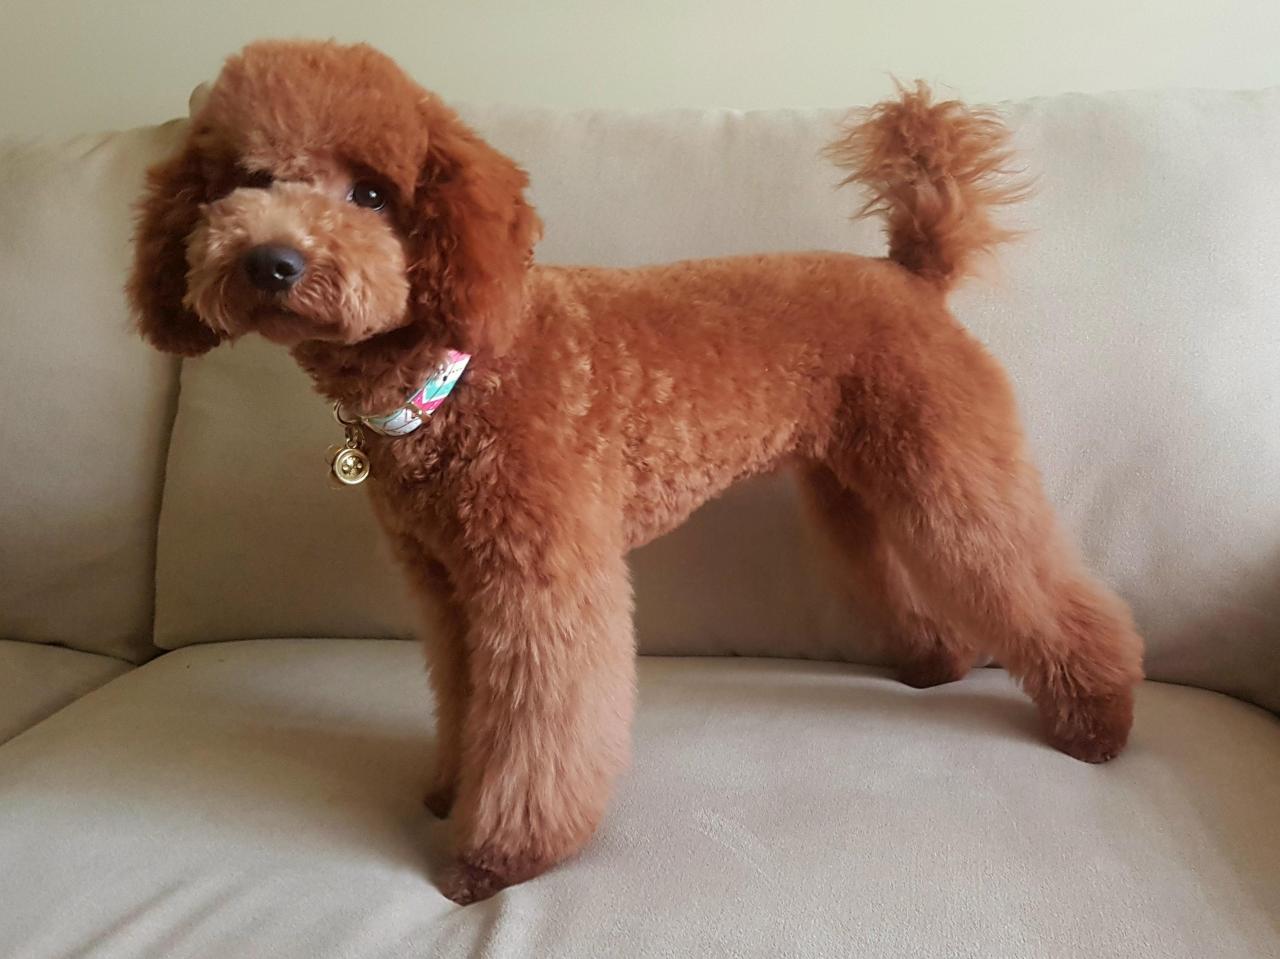 7 Dapper Hairstyles For Your Poodle - Pawsh